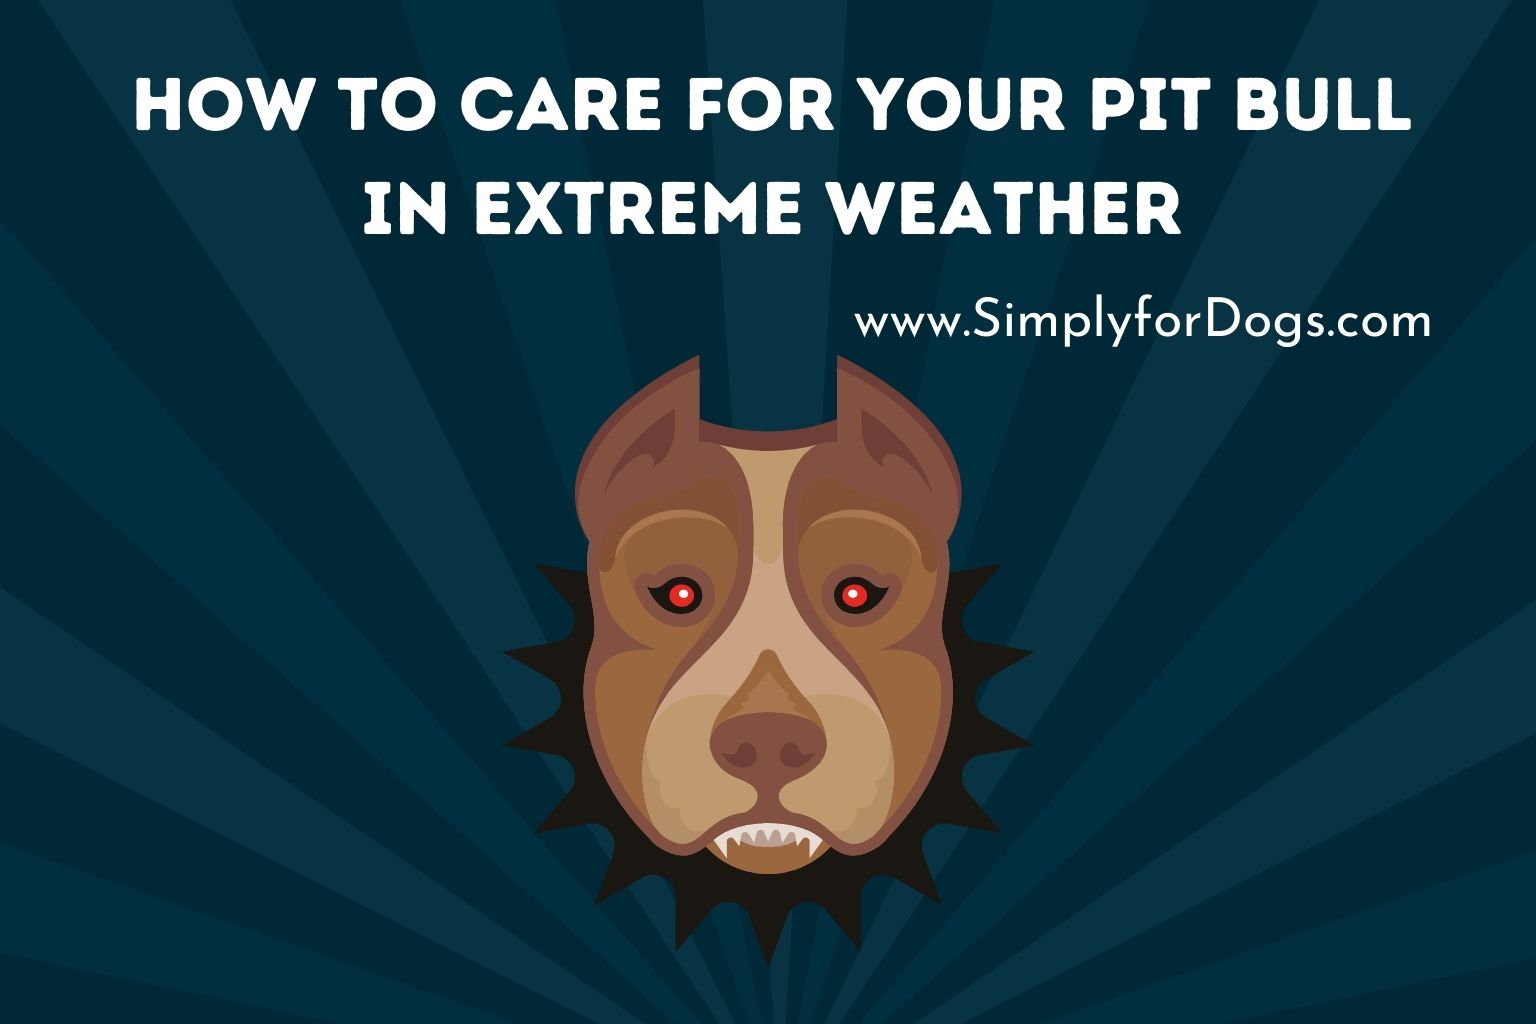 How to Care for Your Pit Bull in Extreme Weather